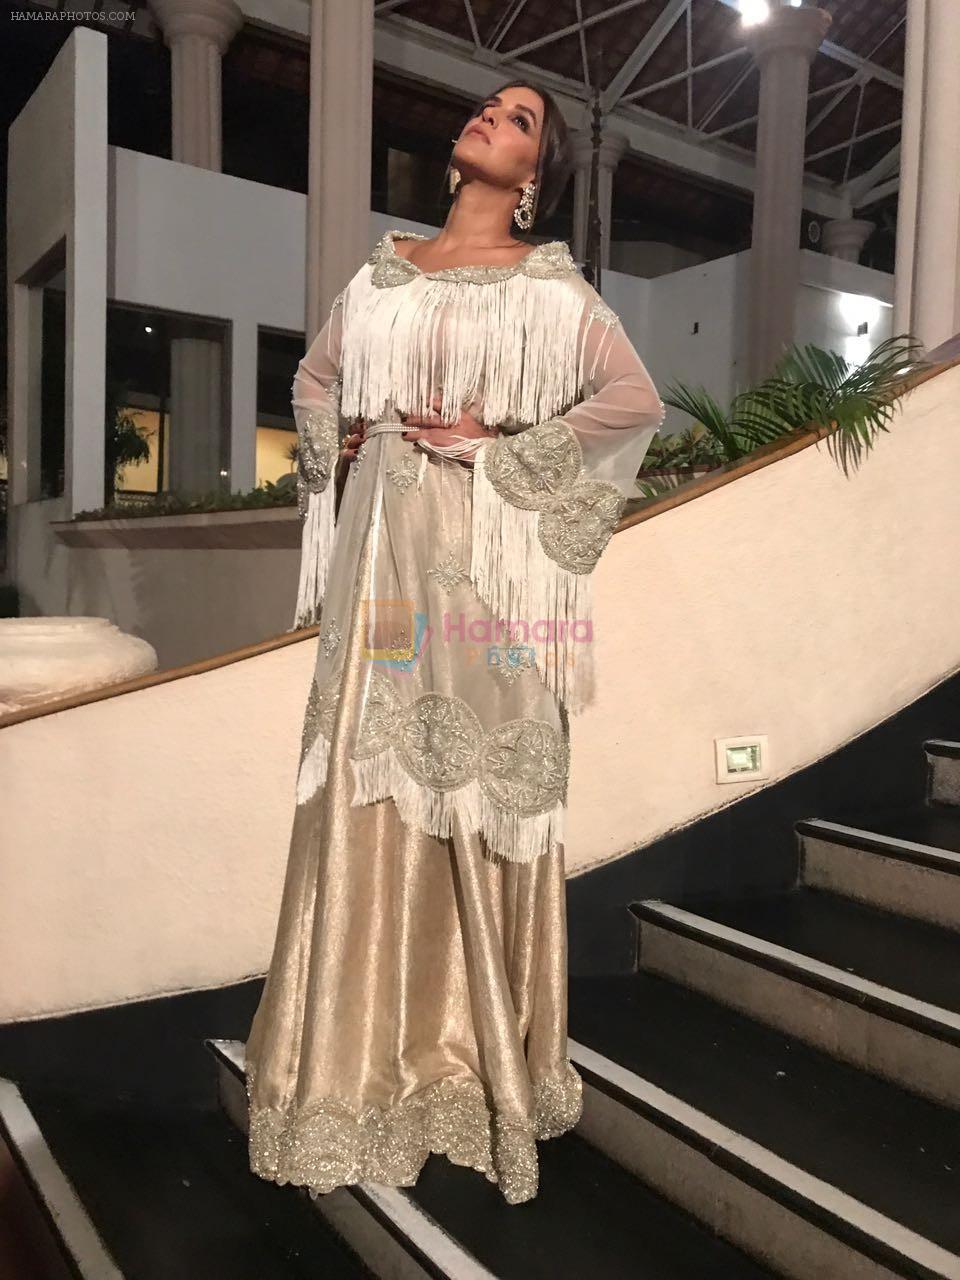 Neha Dhupia In faraz Manan and Anmol jewels for hosting a wedding event in goa